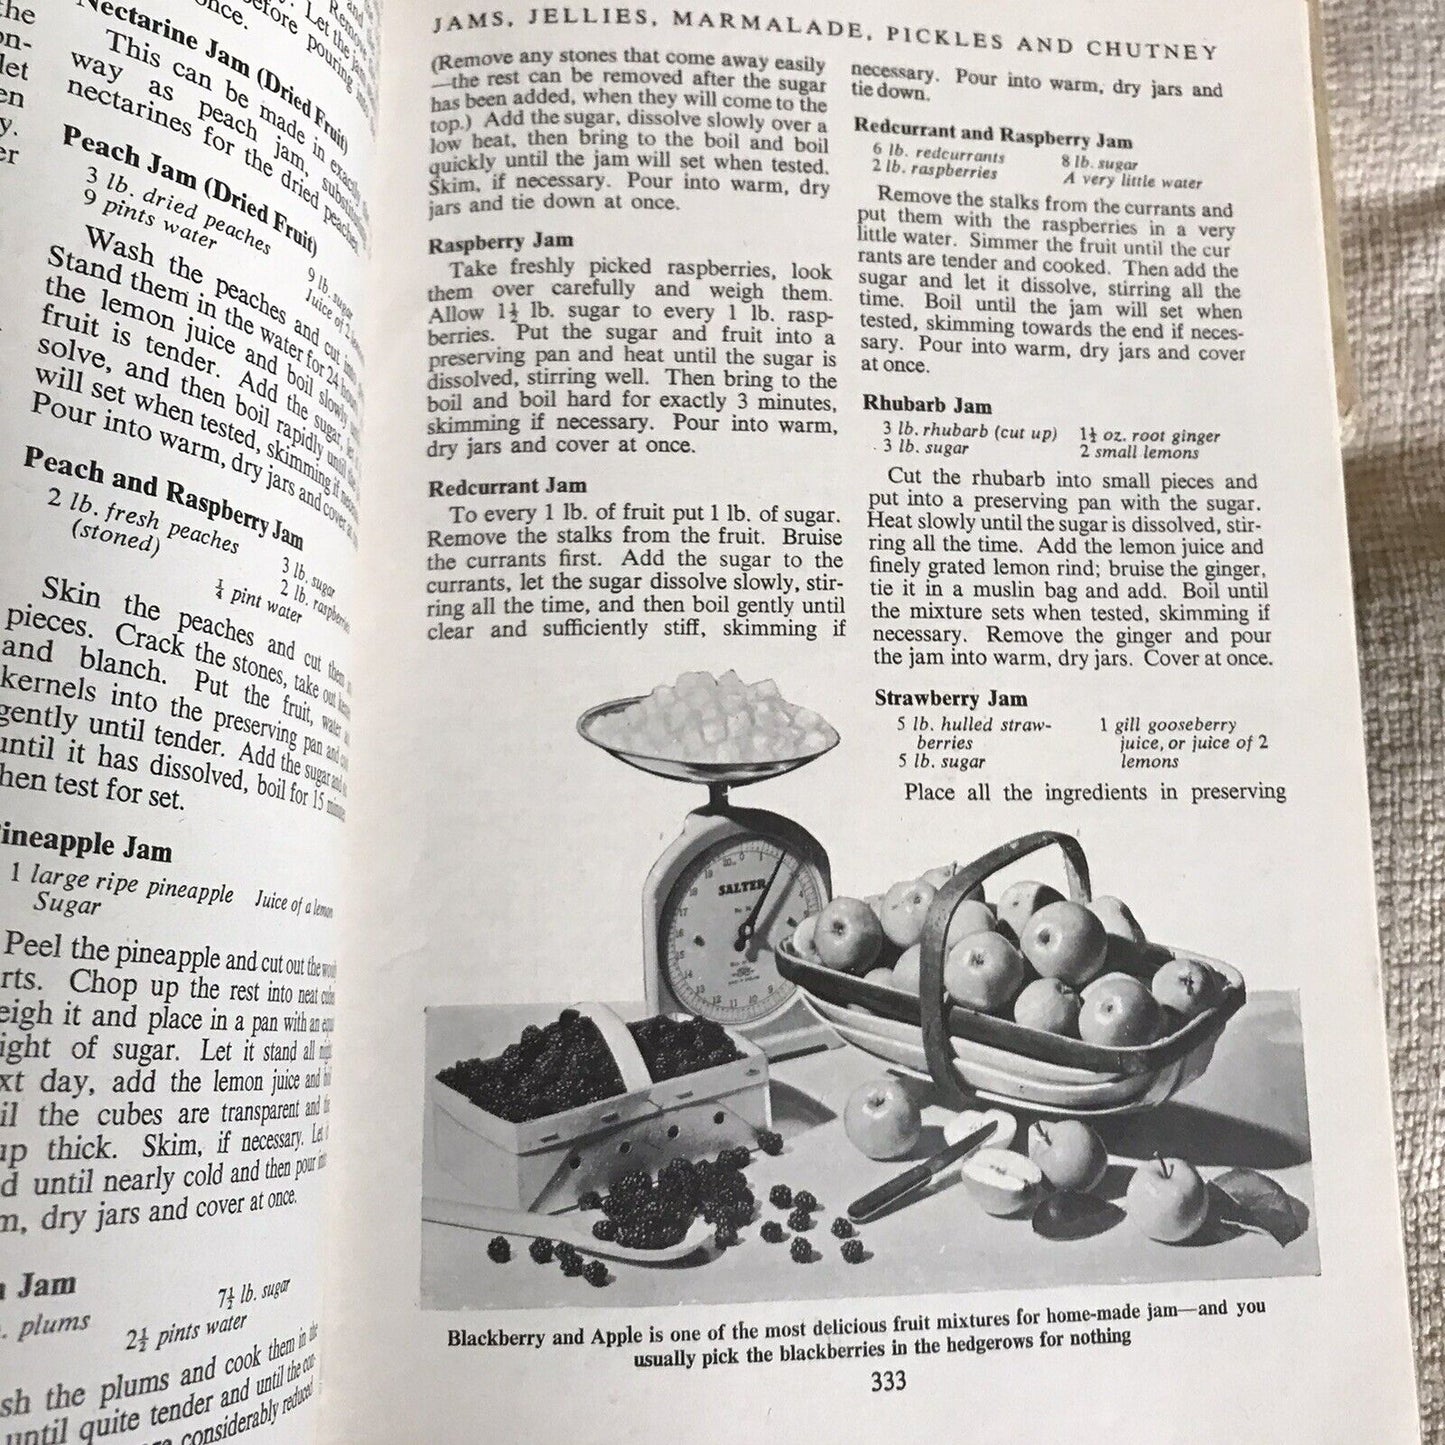 1964 Woman’s Own Cook Book (George Newnes Pub)